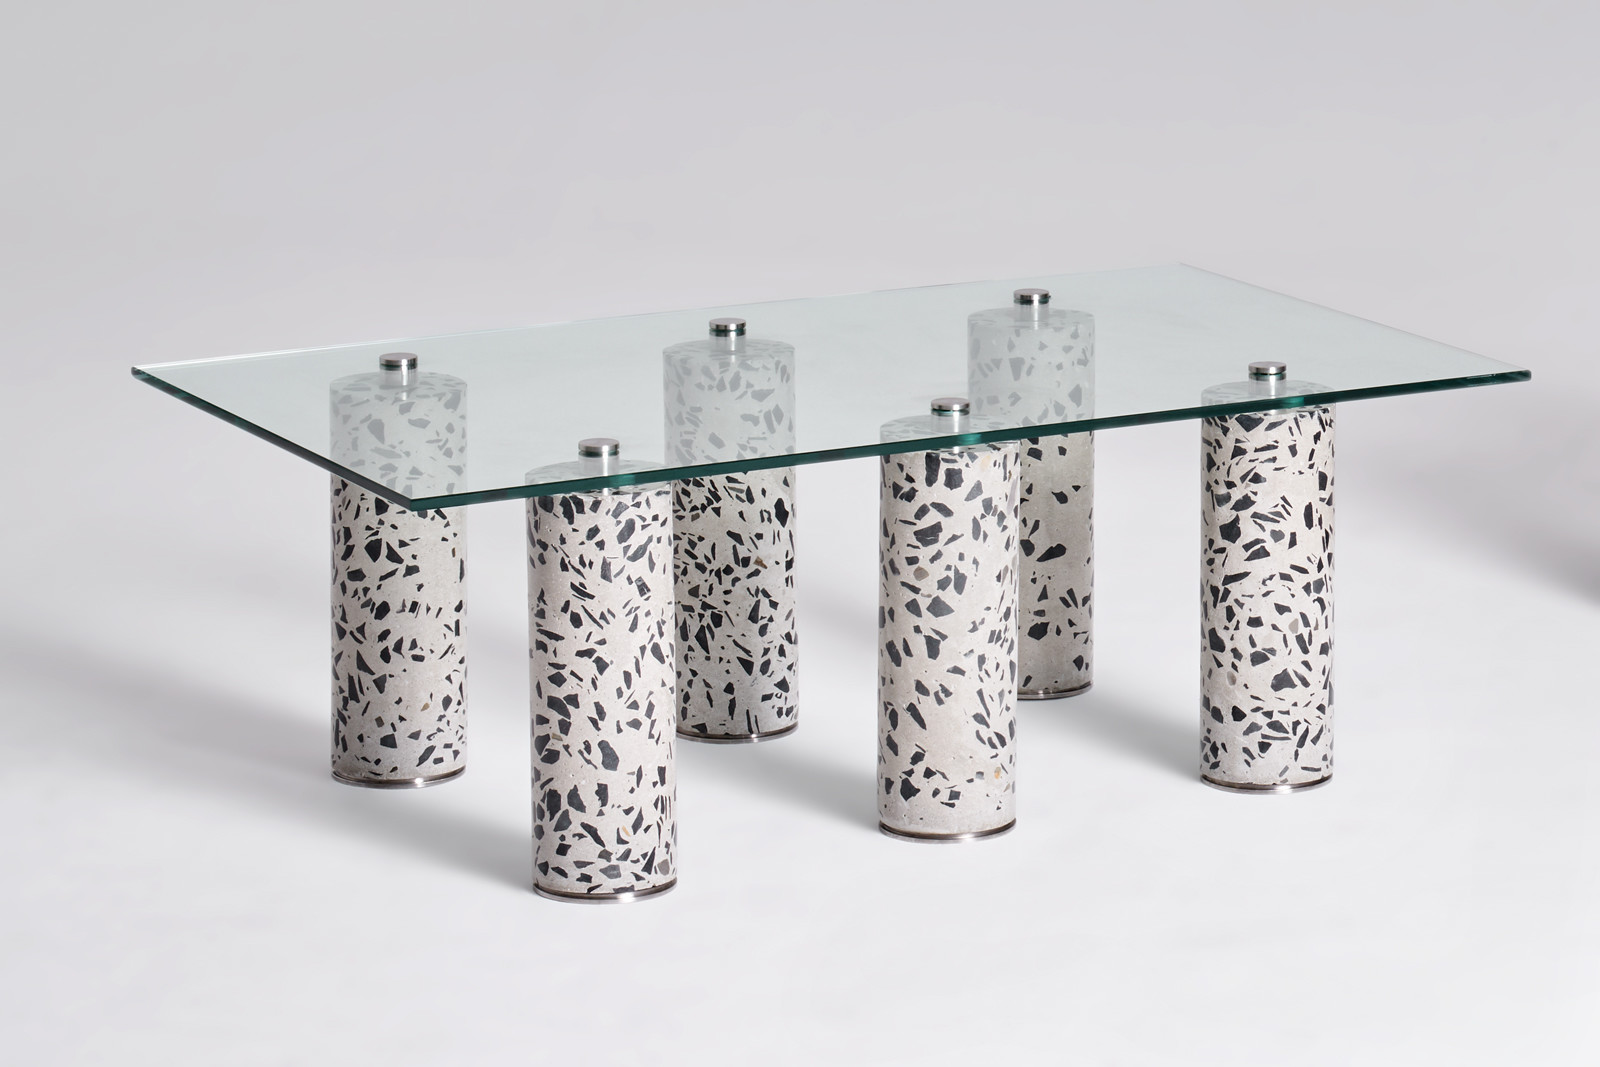 Contemporary coffee table 6, 2019. Limited edition 126cm (L) x 74cm (W) x 45cm (H) Concrete, Stainless Steel, Glass. © Oliver Whyte.